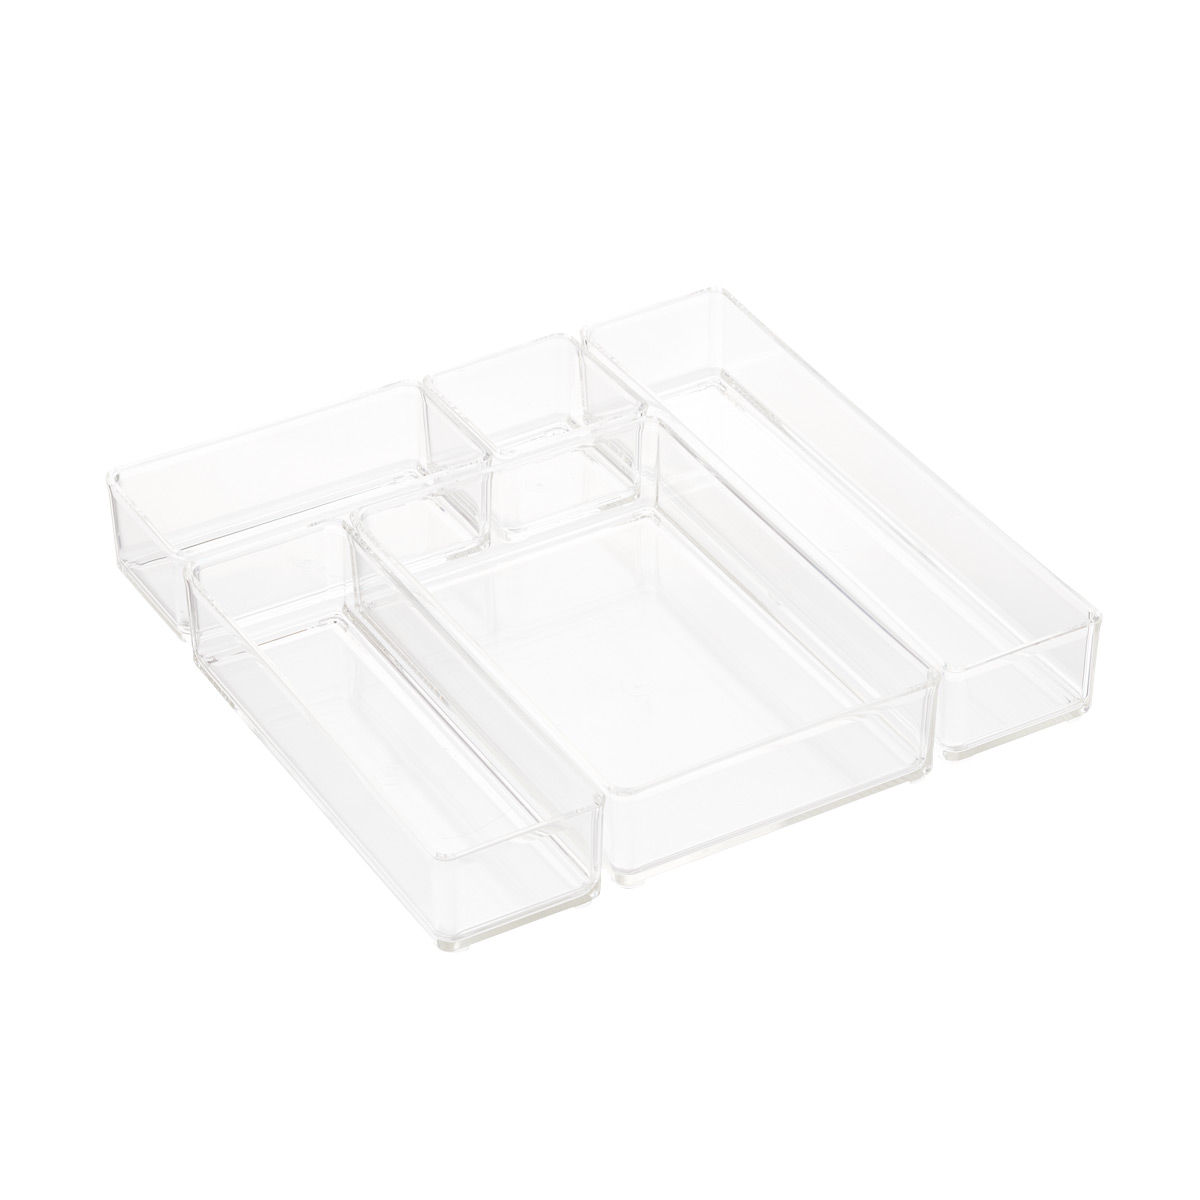 https://www.containerstore.com/catalogimages/345709/1007300-stacking-drawer-organizers-a.jpg